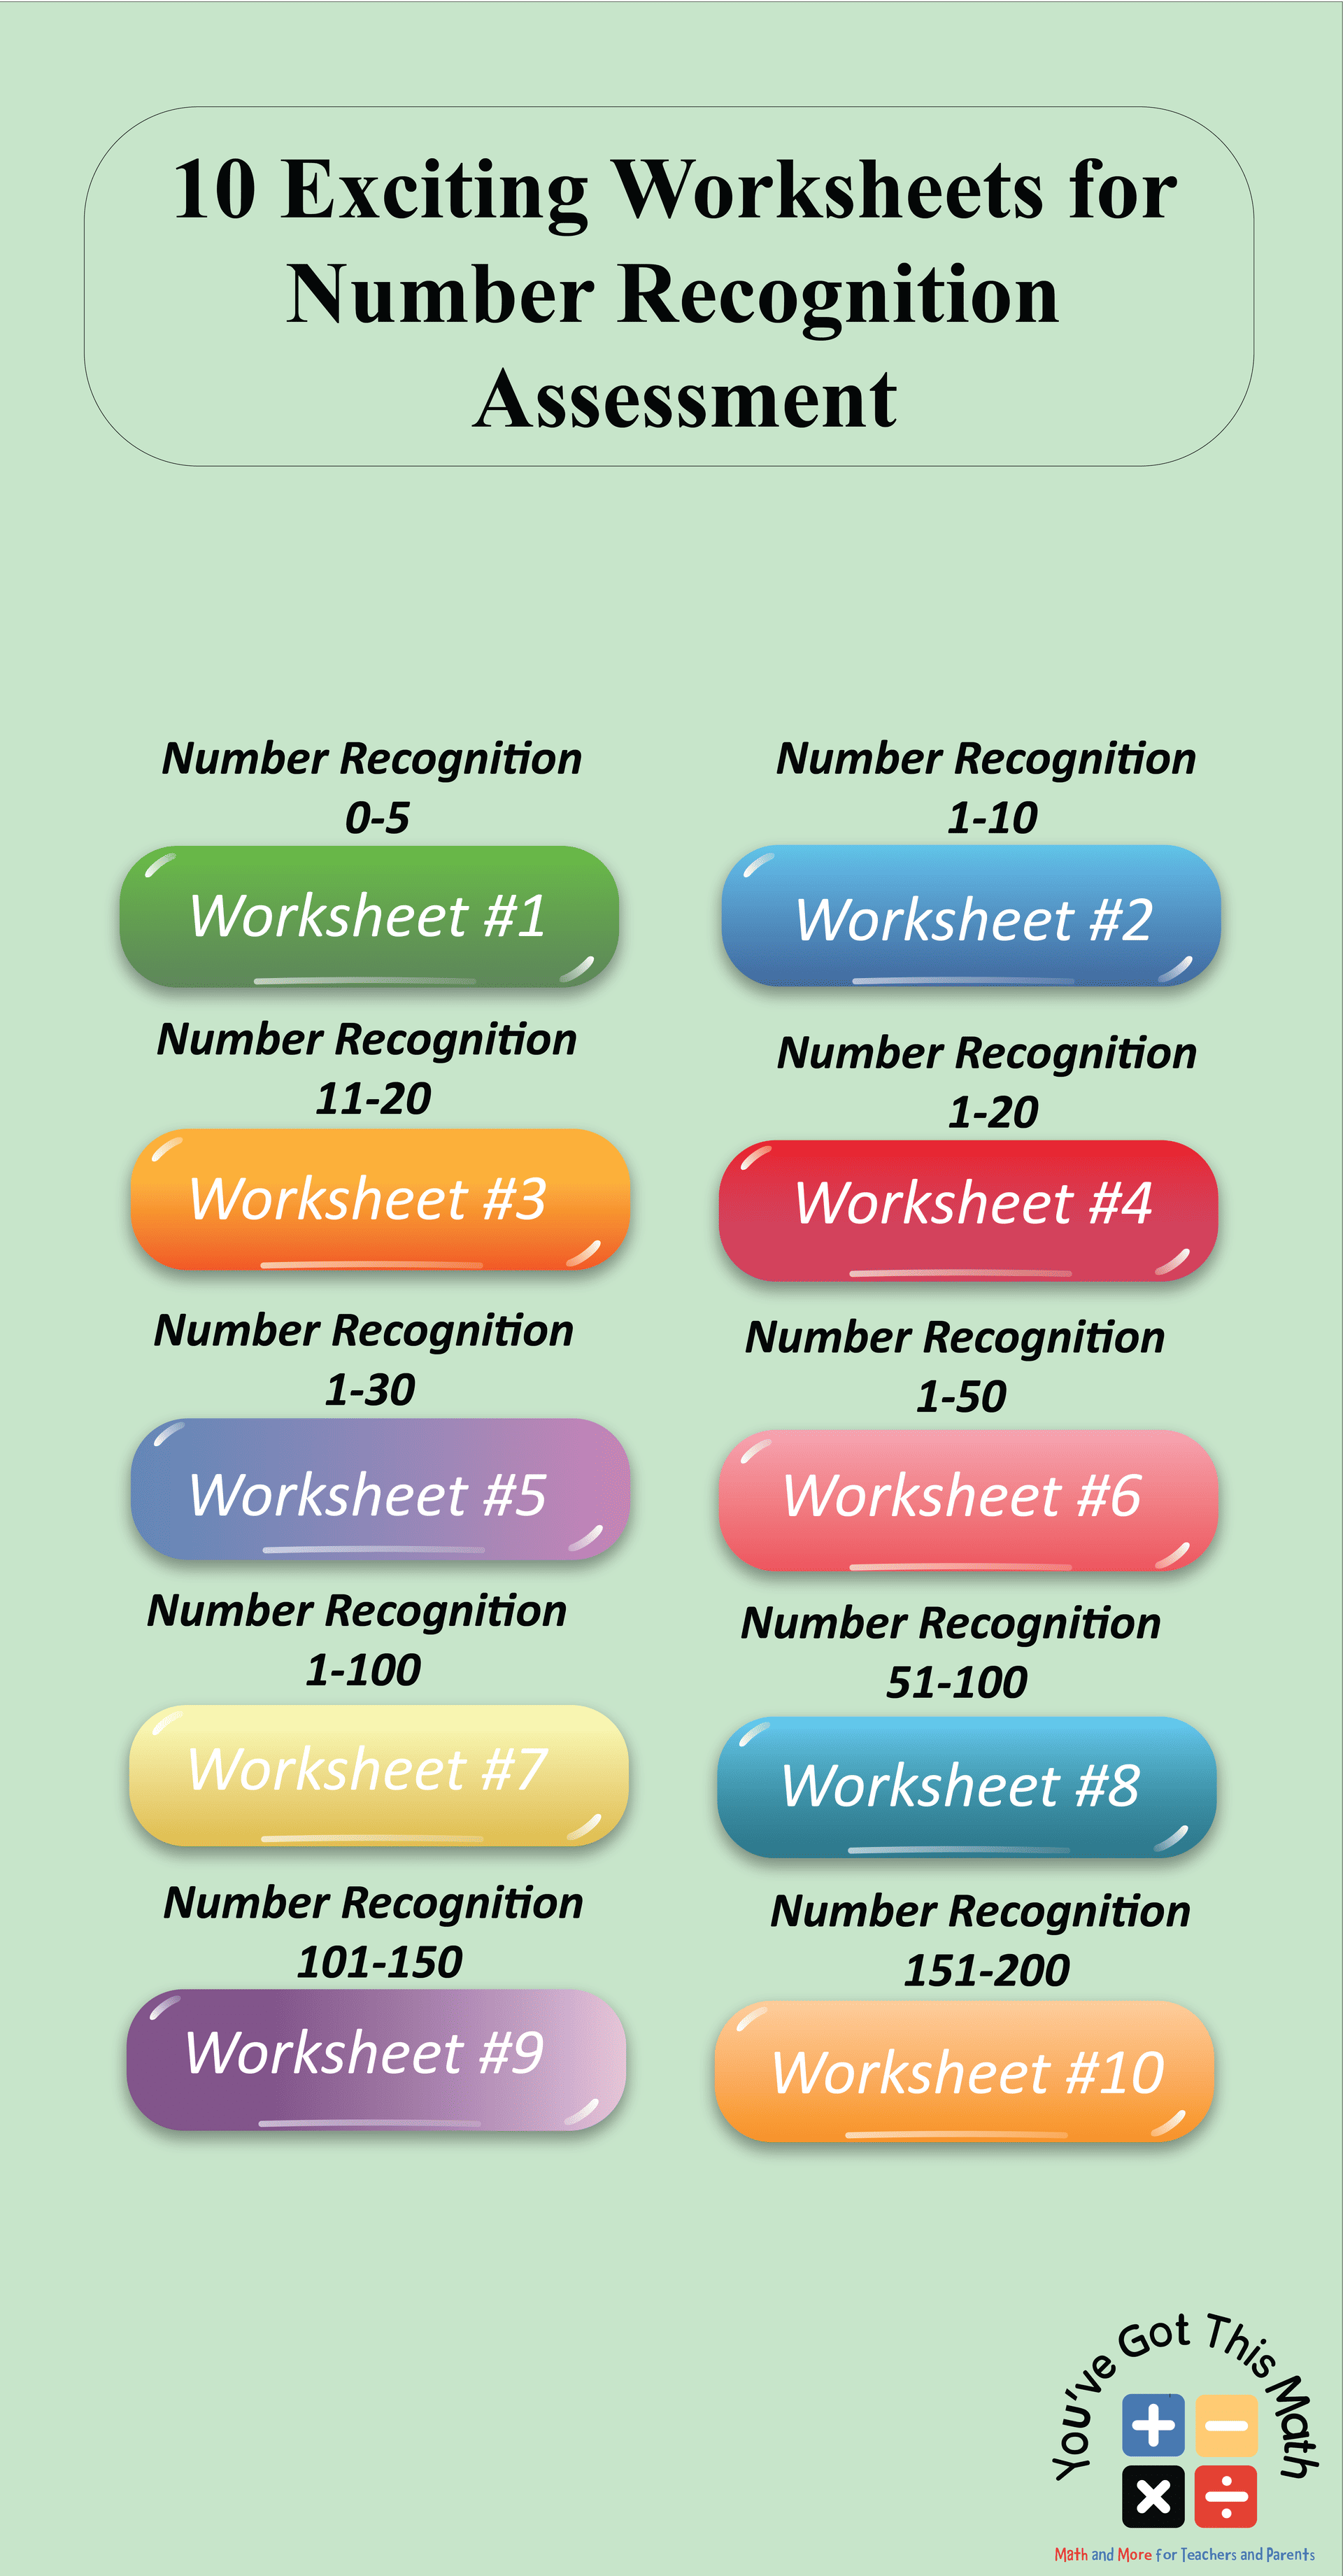 10 Exciting Worksheets for Number Recognition Assessment-01